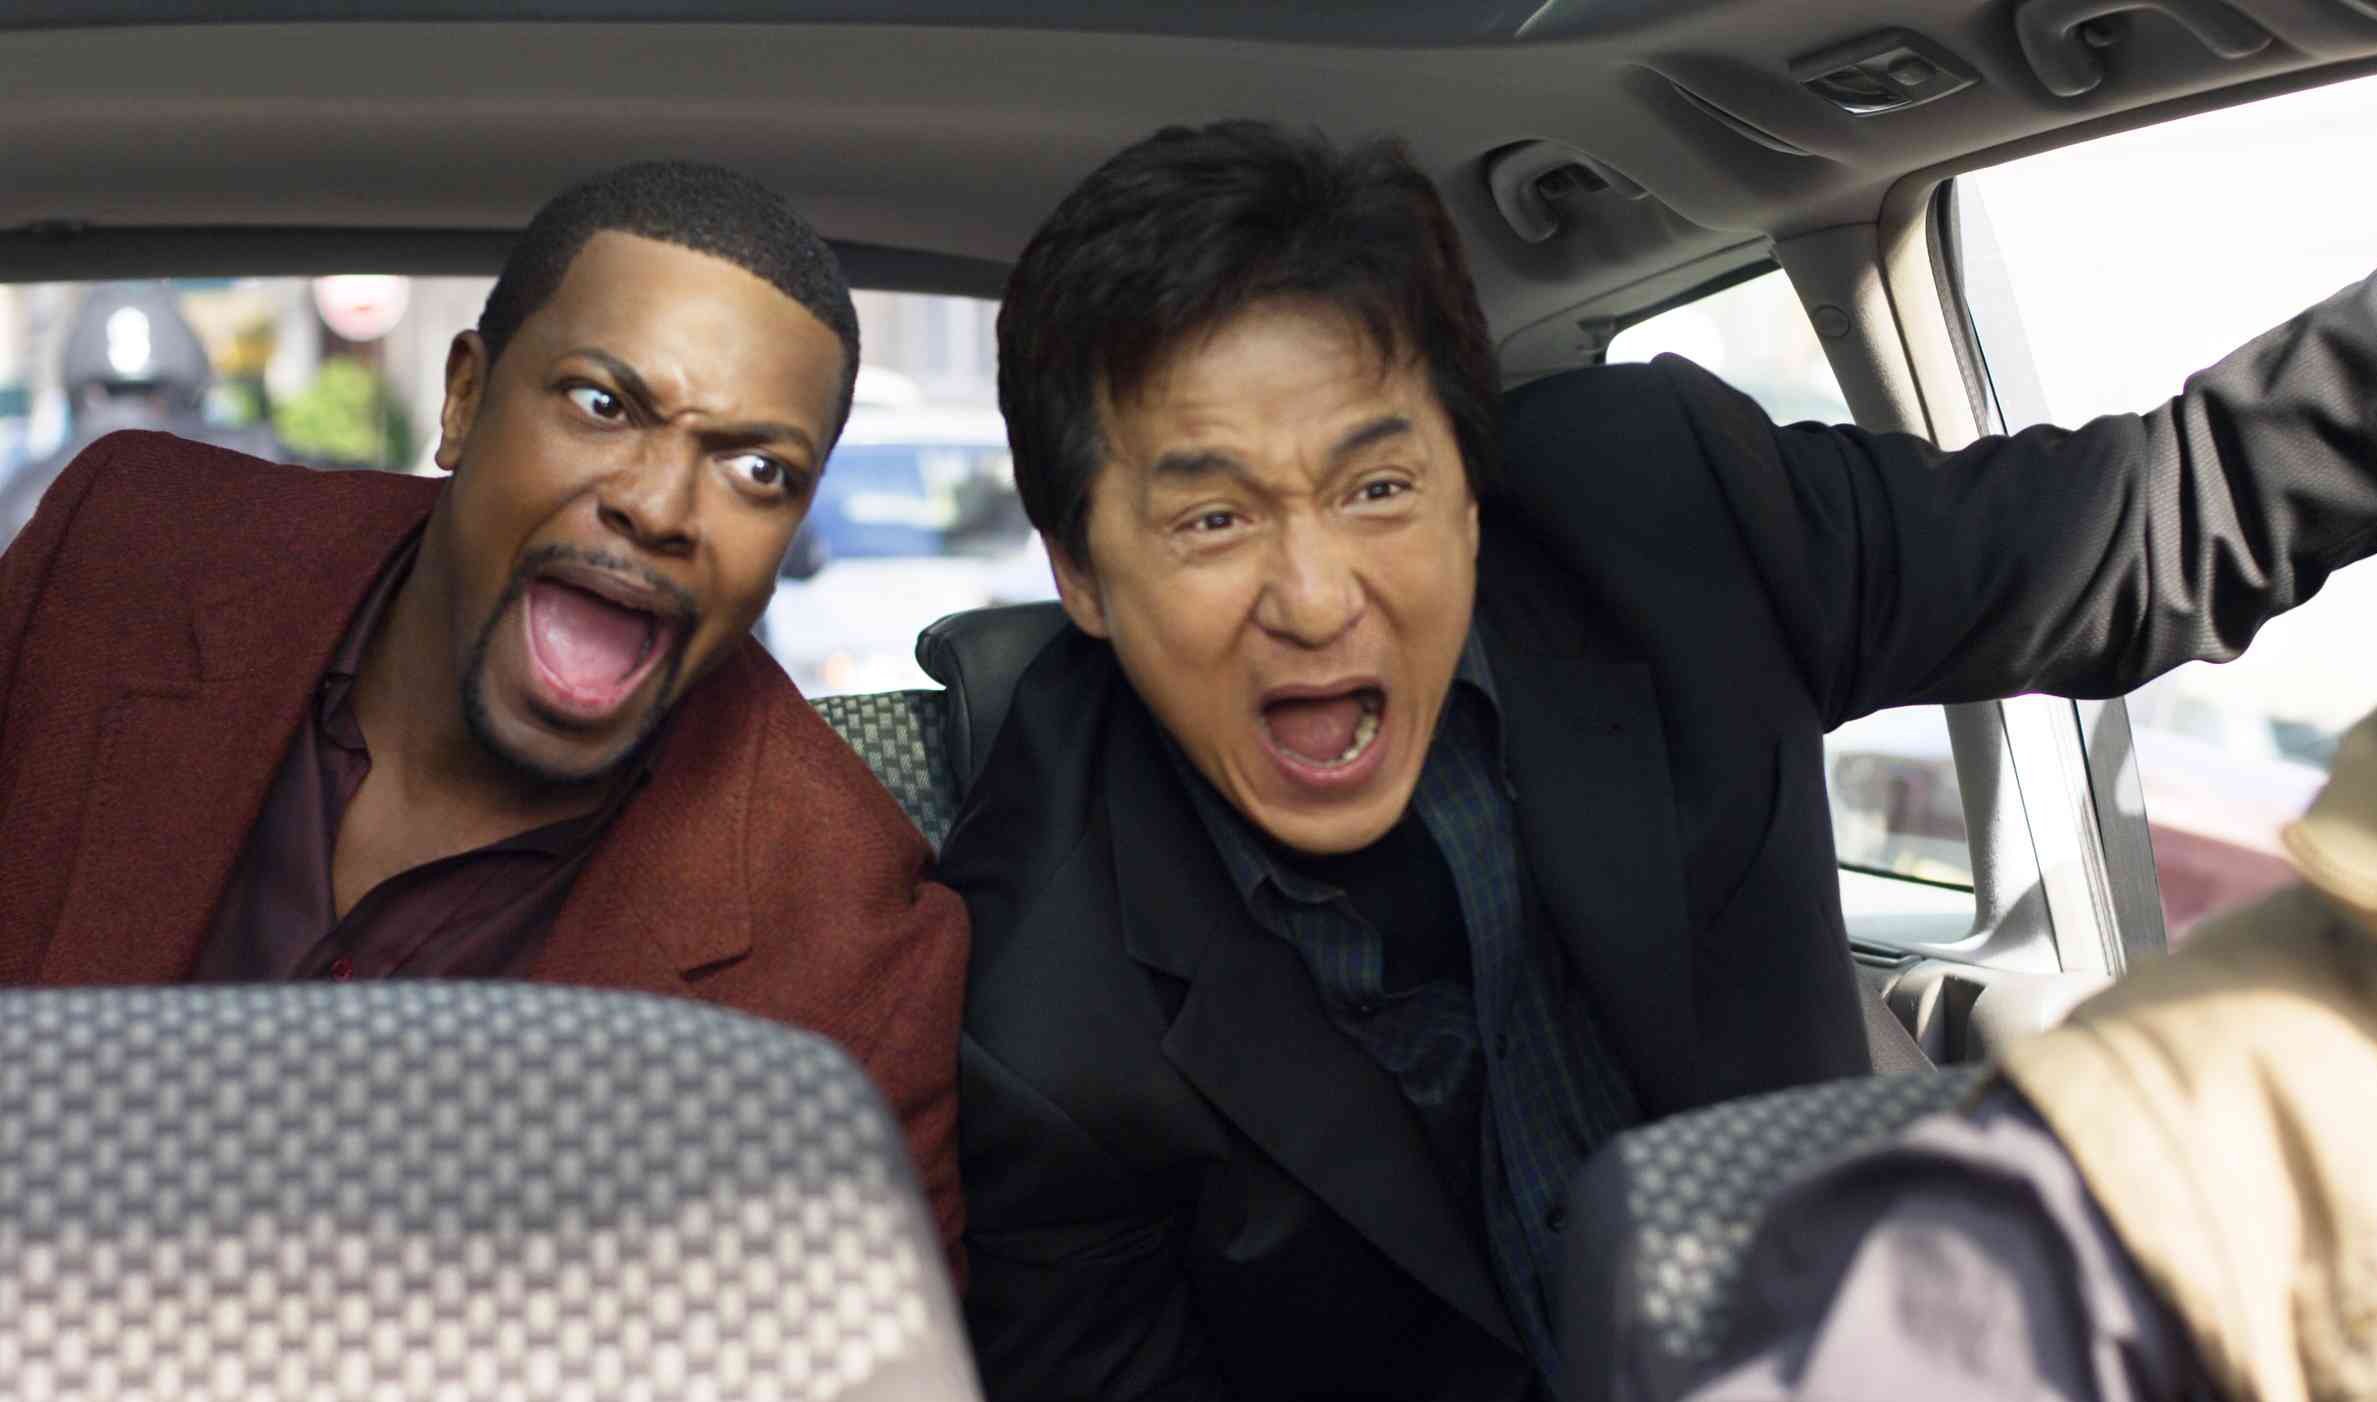 Rush Hour Backgrounds, Compatible - PC, Mobile, Gadgets| 2377x1402 px